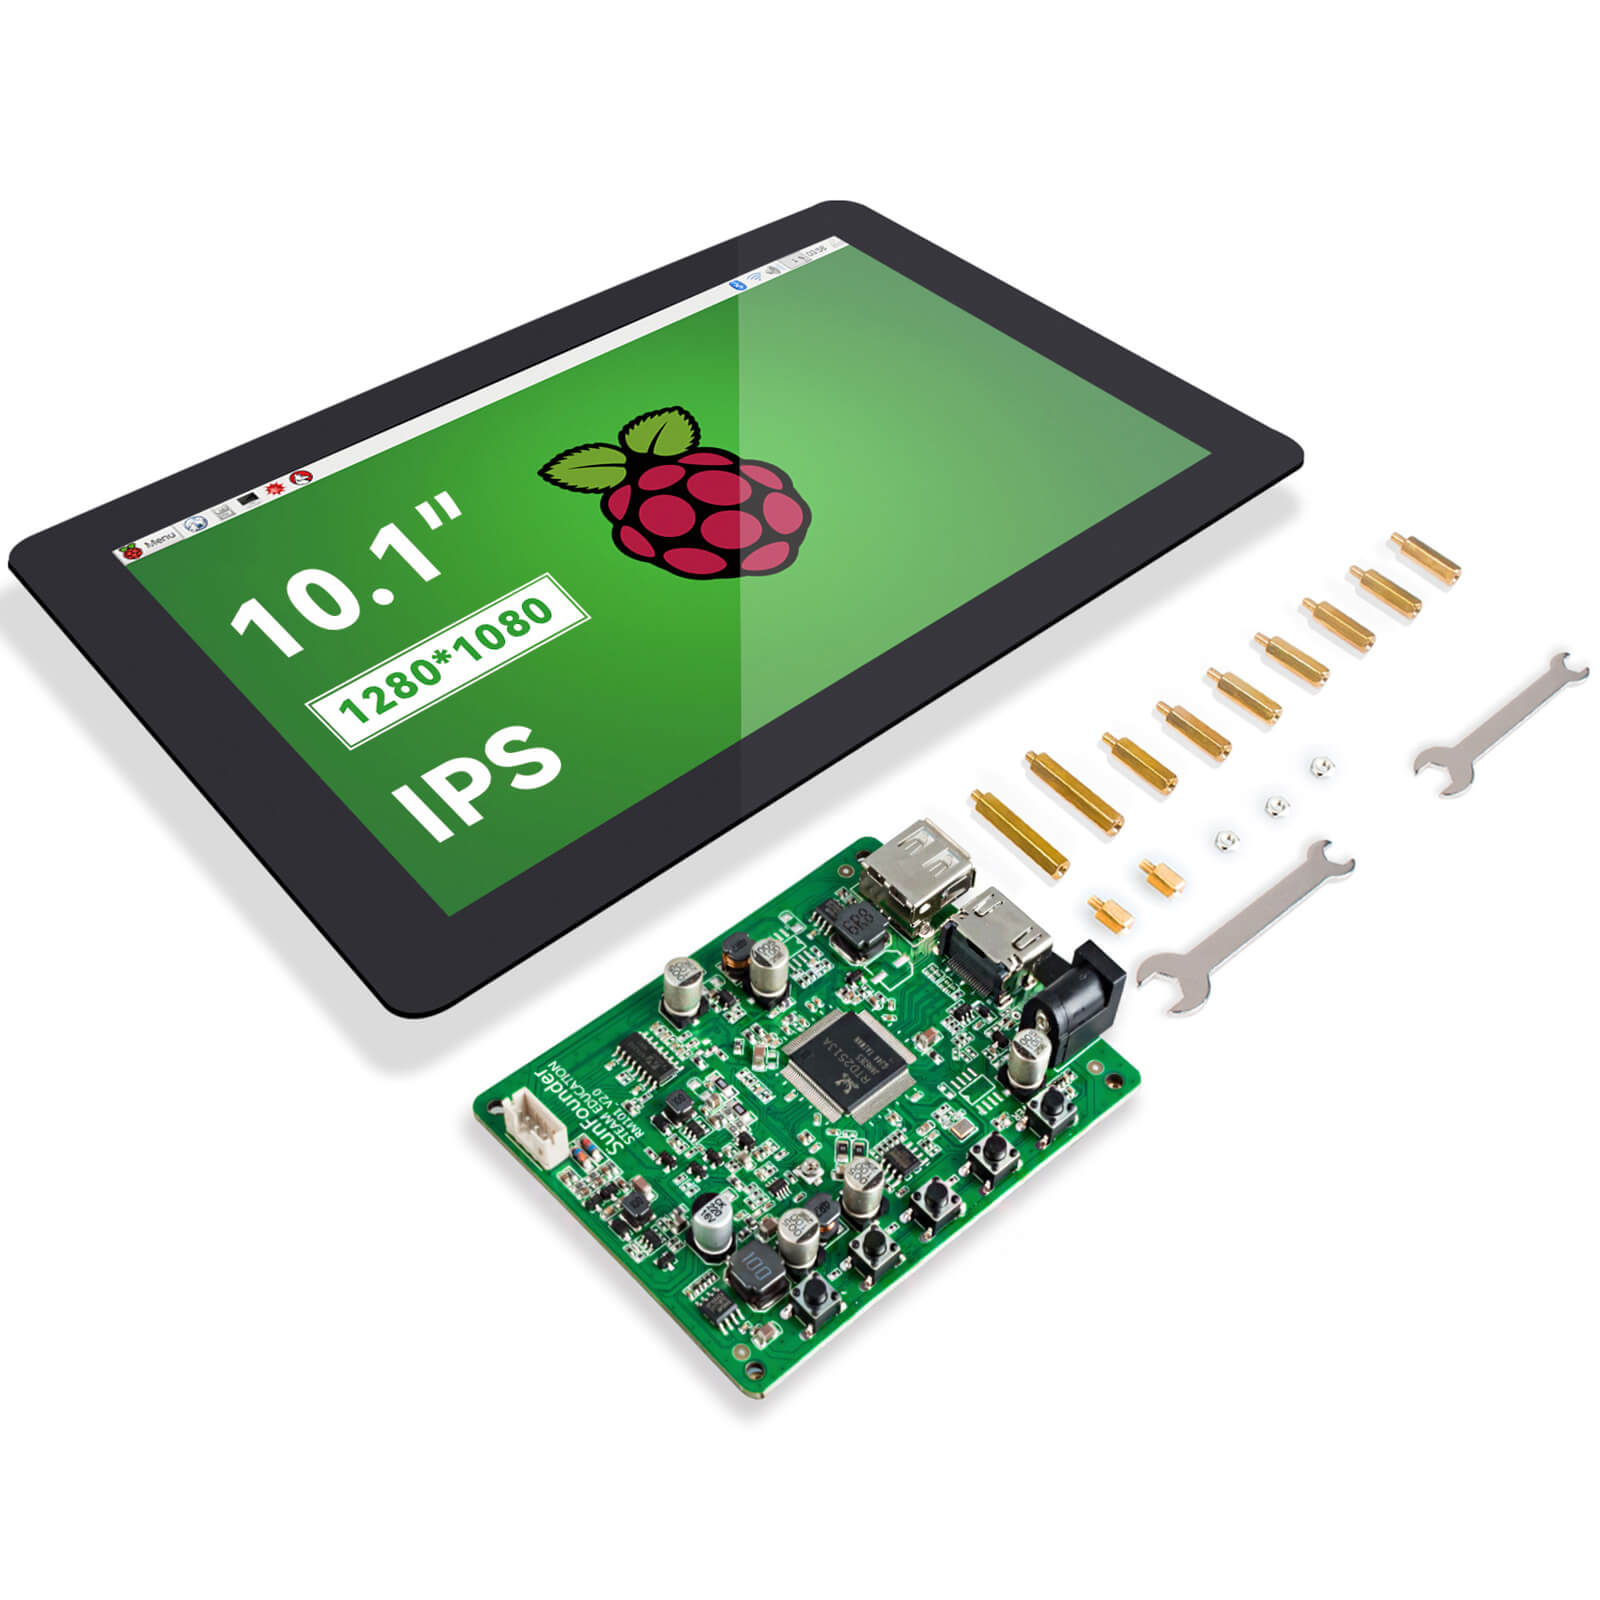  Orange Pi 5 10.1 Inch LCD Touch Screen Portable